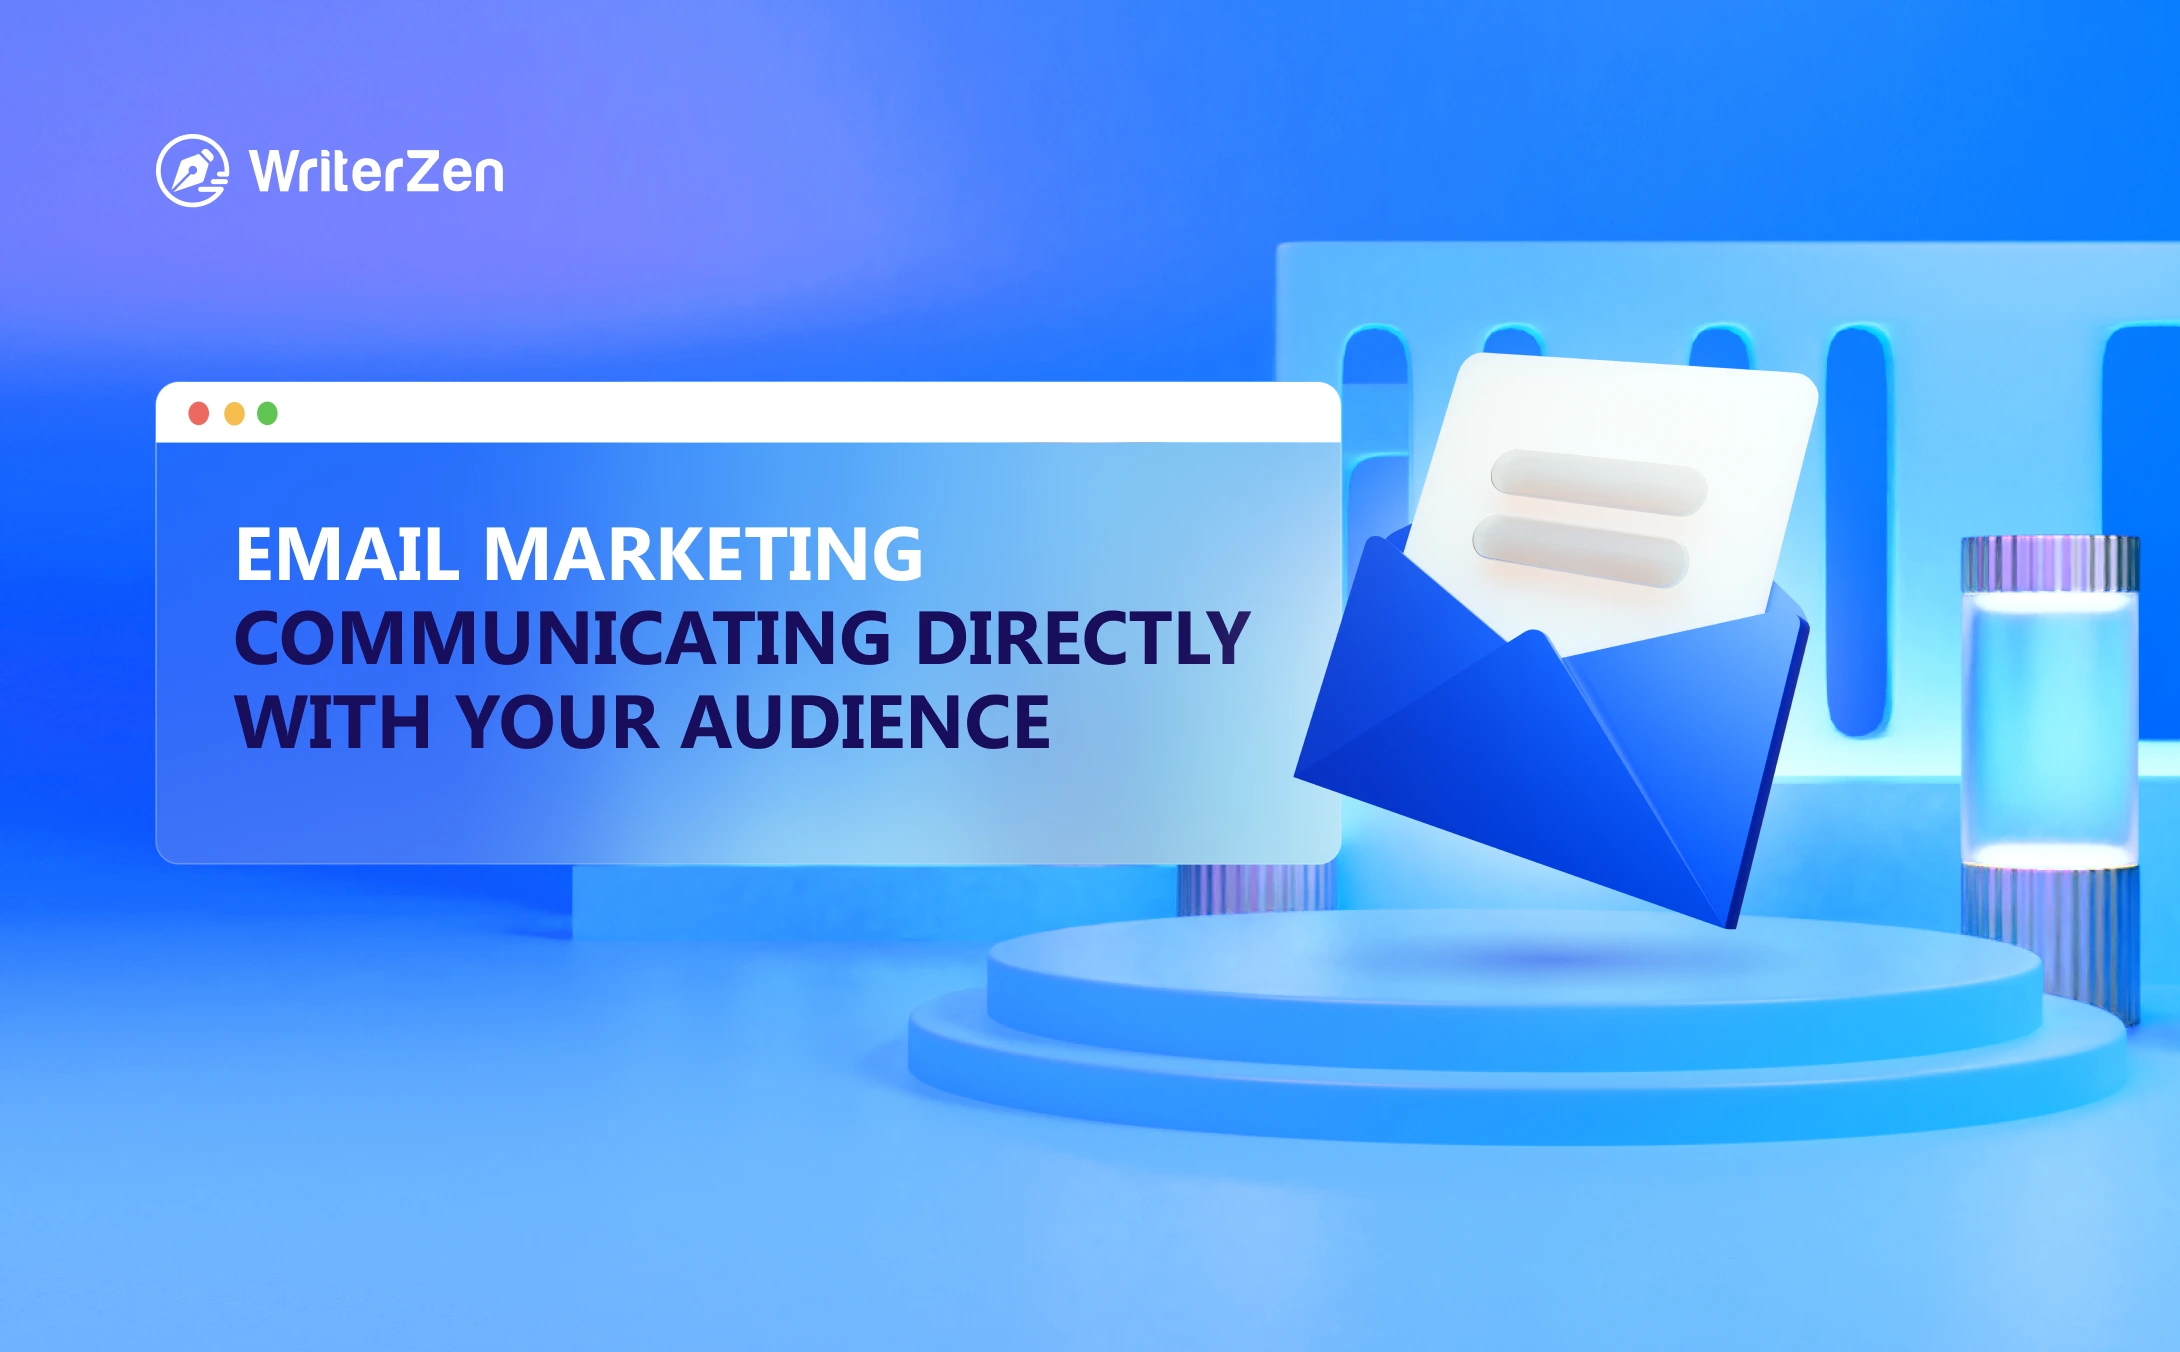 Email Marketing: Communicating Directly with Your Audience